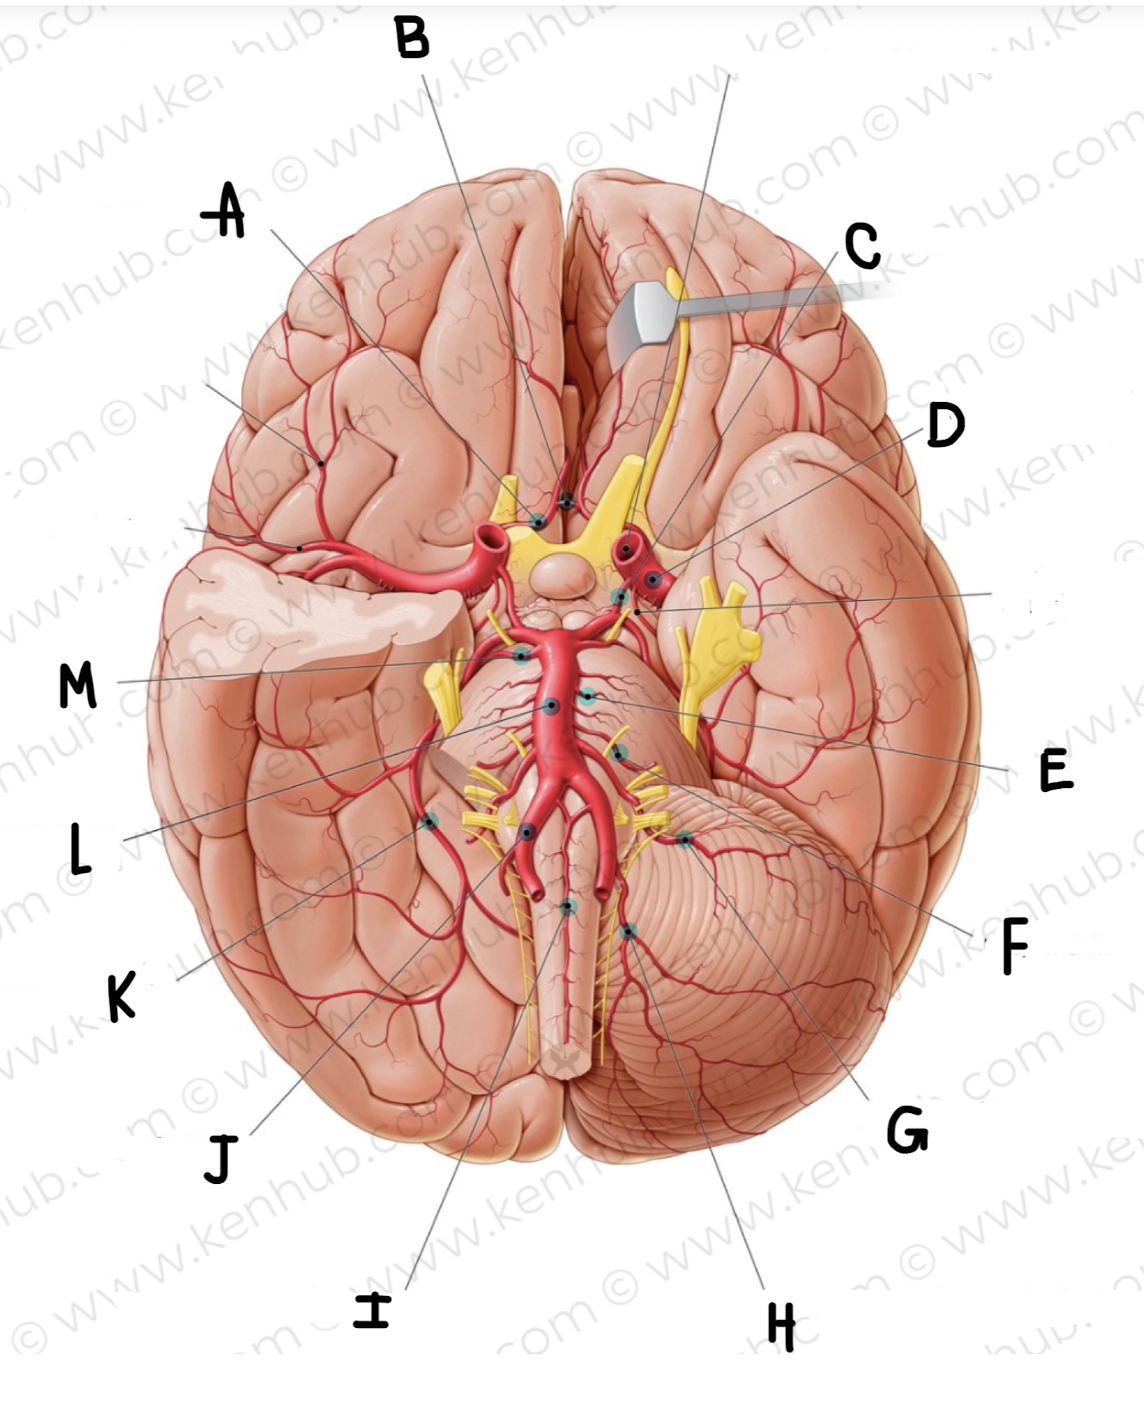 <p>What is the name of the artery labeled D?</p>